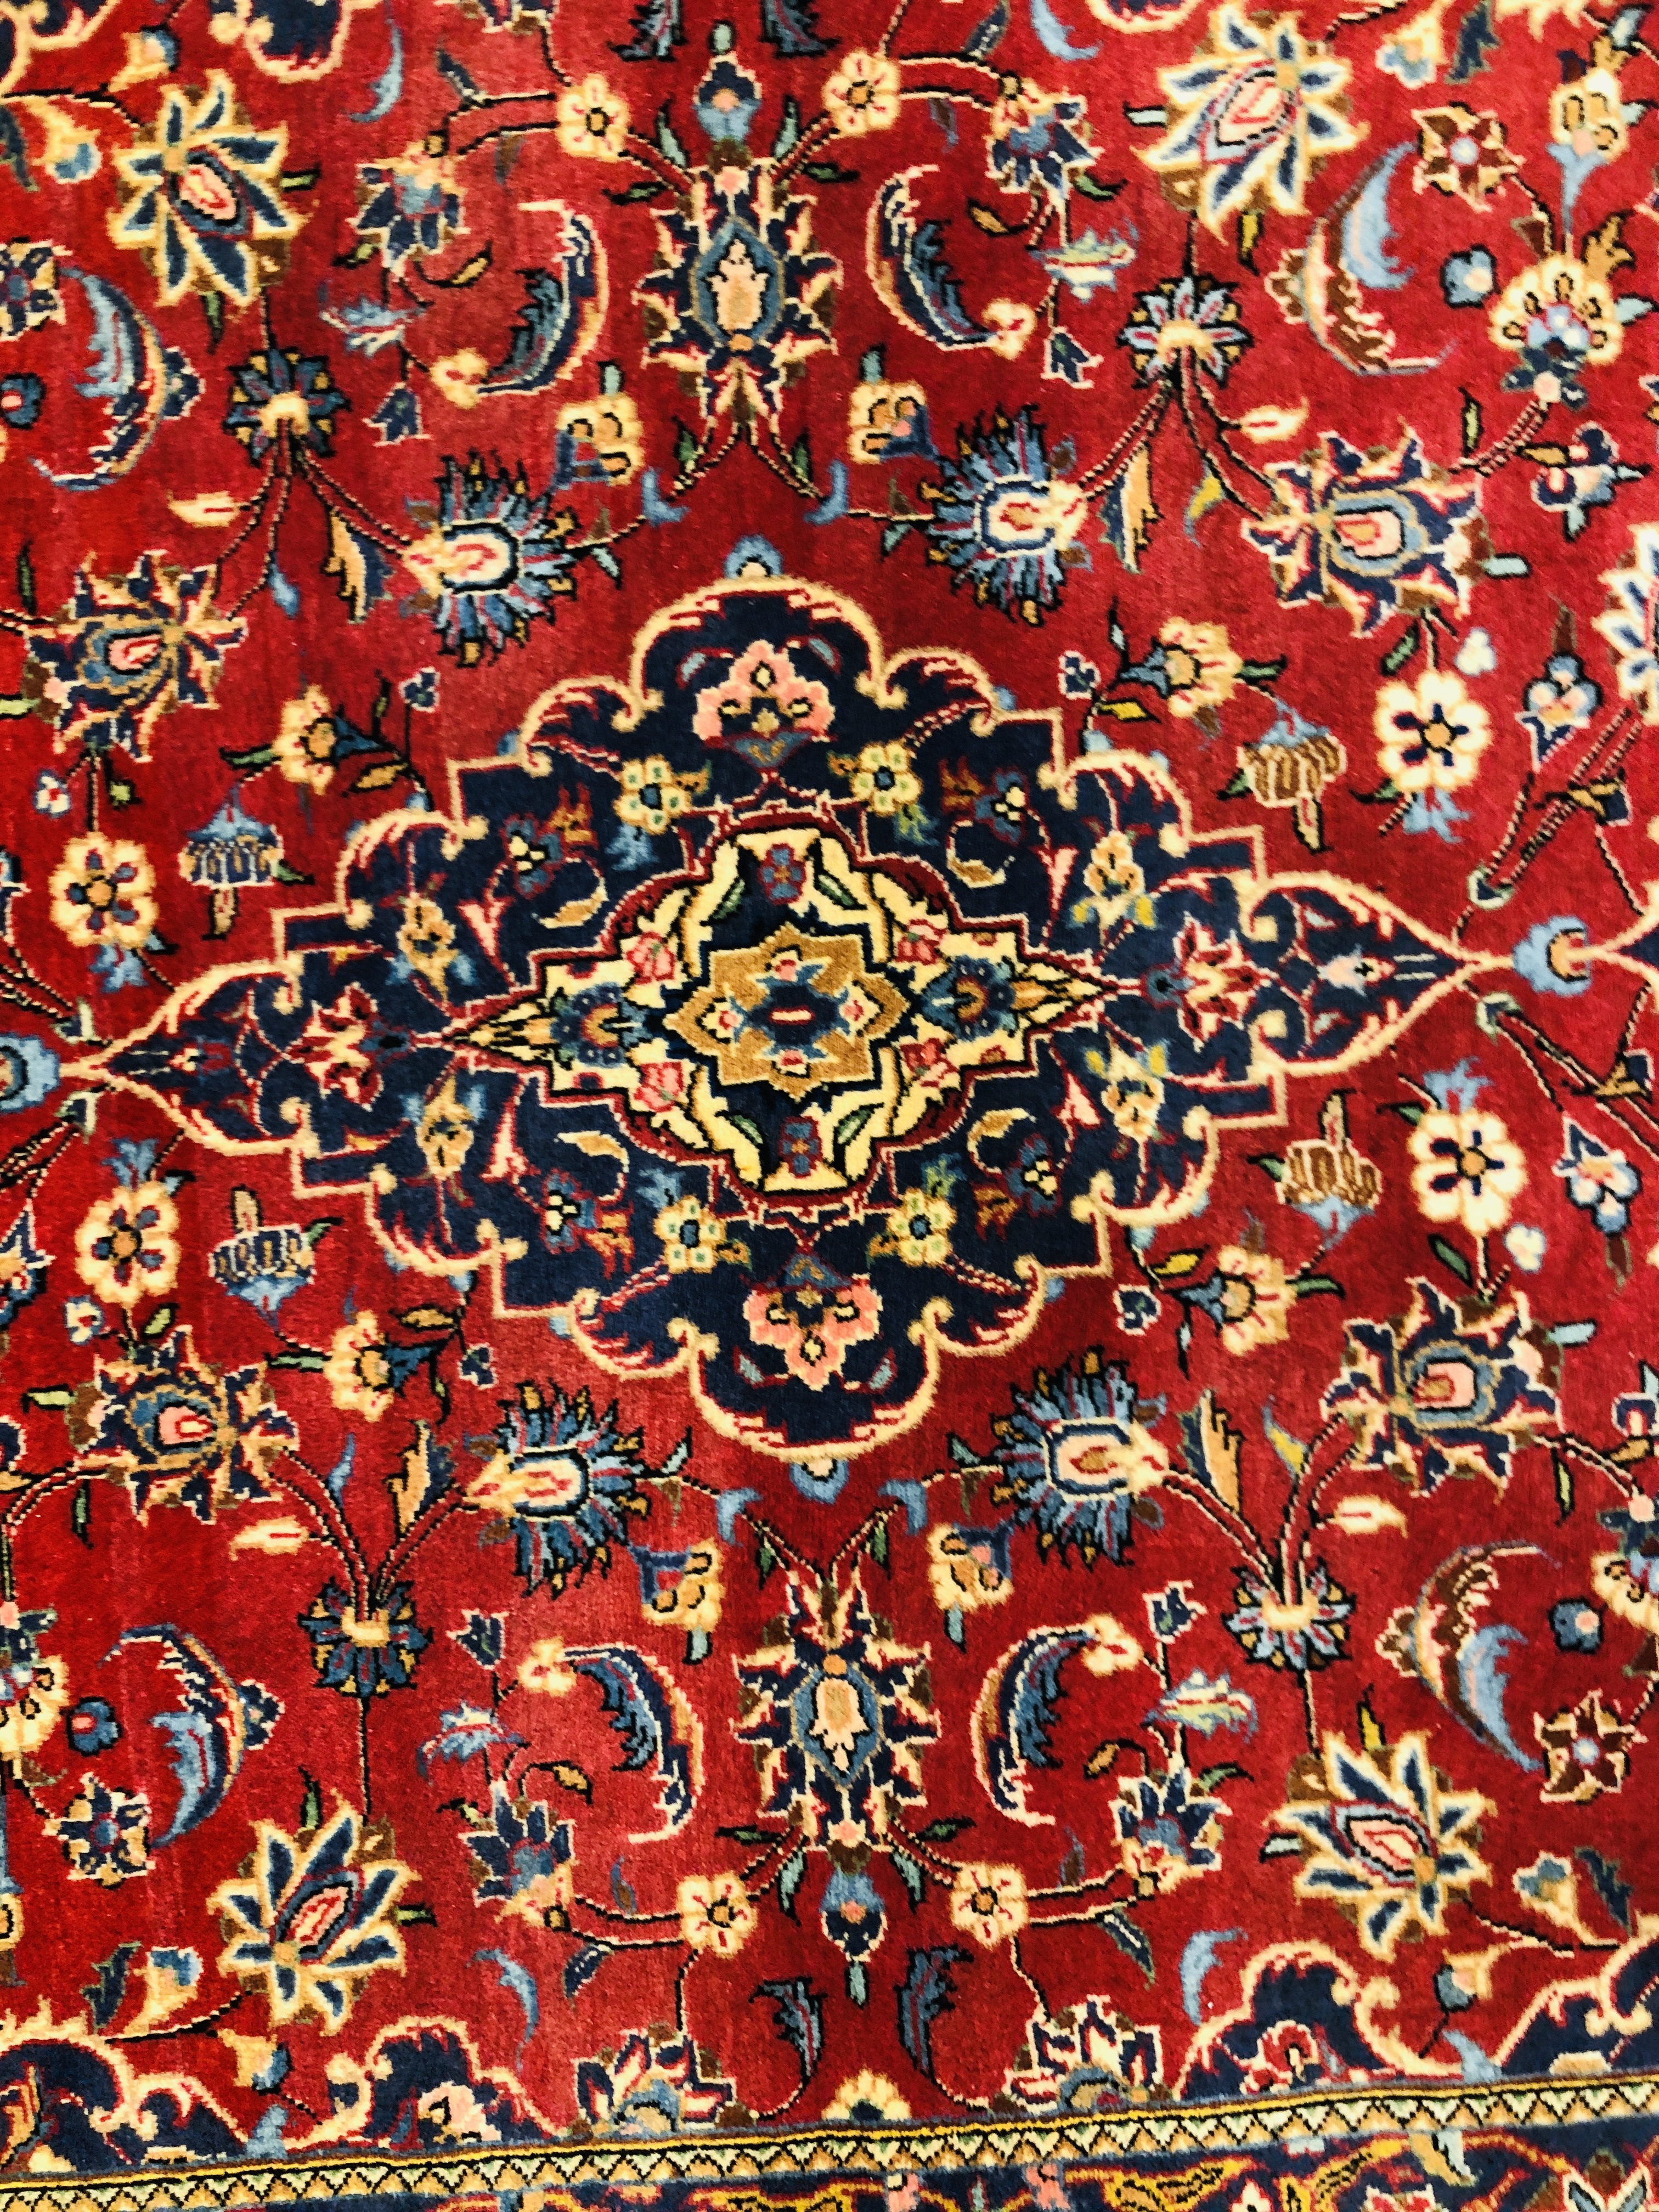 A KASHAN TRADITIONAL RED / BLUE PATTERNED RUG 1.95 X 1. - Image 2 of 3